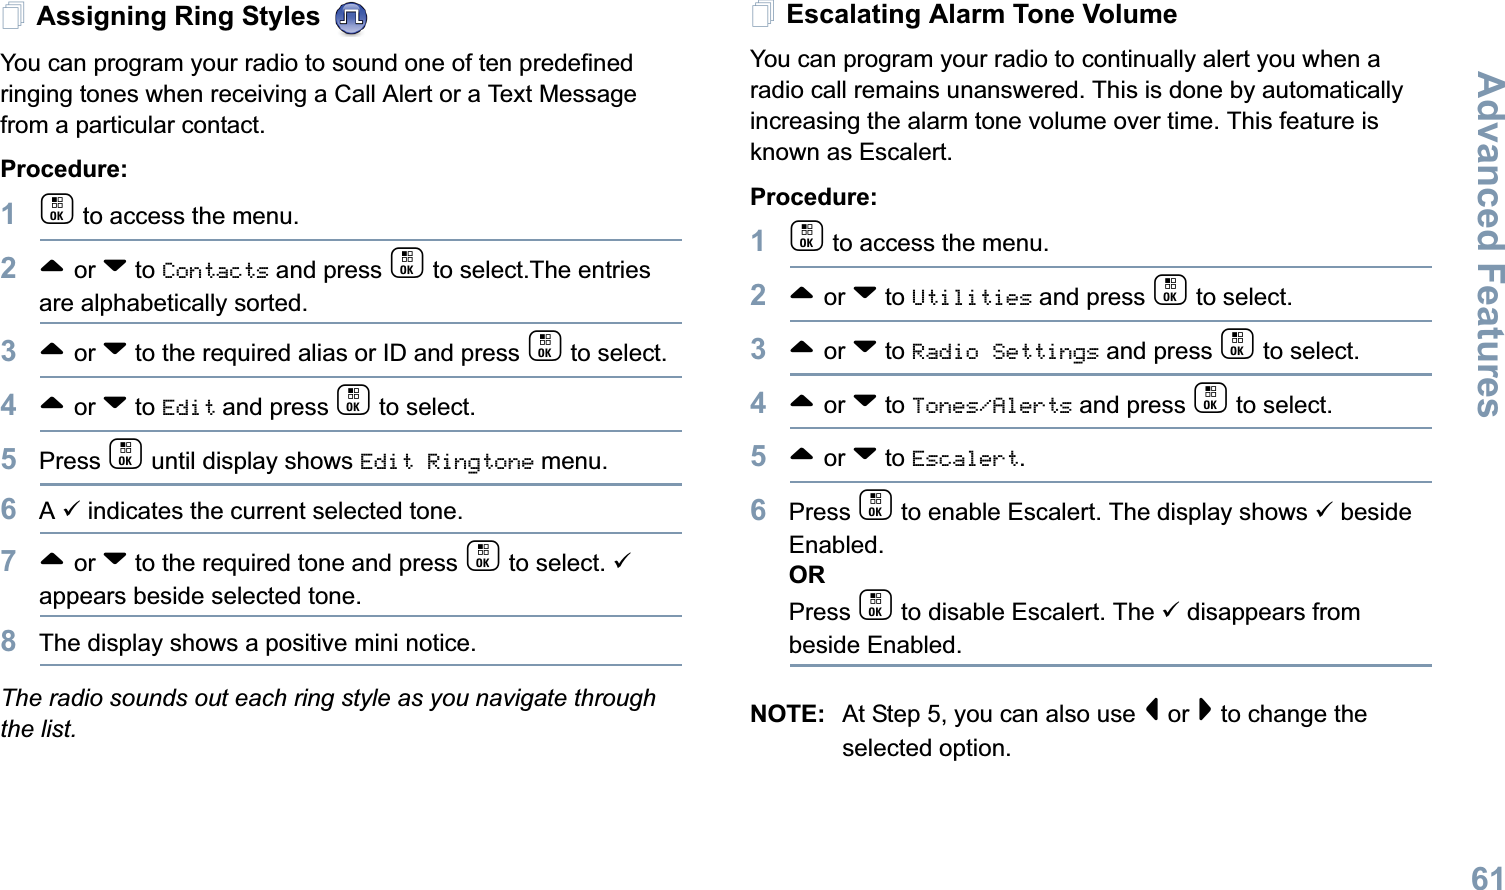 Advanced FeaturesEnglish61Assigning Ring Styles You can program your radio to sound one of ten predefined ringing tones when receiving a Call Alert or a Text Message from a particular contact.Procedure: 1c to access the menu.2^ or v to Contacts and press c to select.The entries are alphabetically sorted.3^ or v to the required alias or ID and press c to select.4^ or v to Edit and press c to select.5Press c until display shows Edit Ringtone menu.6A 9 indicates the current selected tone.7^ or v to the required tone and press c to select. 9 appears beside selected tone. 8The display shows a positive mini notice.The radio sounds out each ring style as you navigate through the list.Escalating Alarm Tone VolumeYou can program your radio to continually alert you when a radio call remains unanswered. This is done by automatically increasing the alarm tone volume over time. This feature is known as Escalert.Procedure:1c to access the menu.2^ or v to Utilities and press c to select.3^ or v to Radio Settings and press c to select.4^ or v to Tones/Alerts and press c to select.5^ or v to Escalert.6Press c to enable Escalert. The display shows 9 beside Enabled.ORPress c to disable Escalert. The 9 disappears from beside Enabled.NOTE: At Step 5, you can also use &lt; or &gt; to change the selected option.